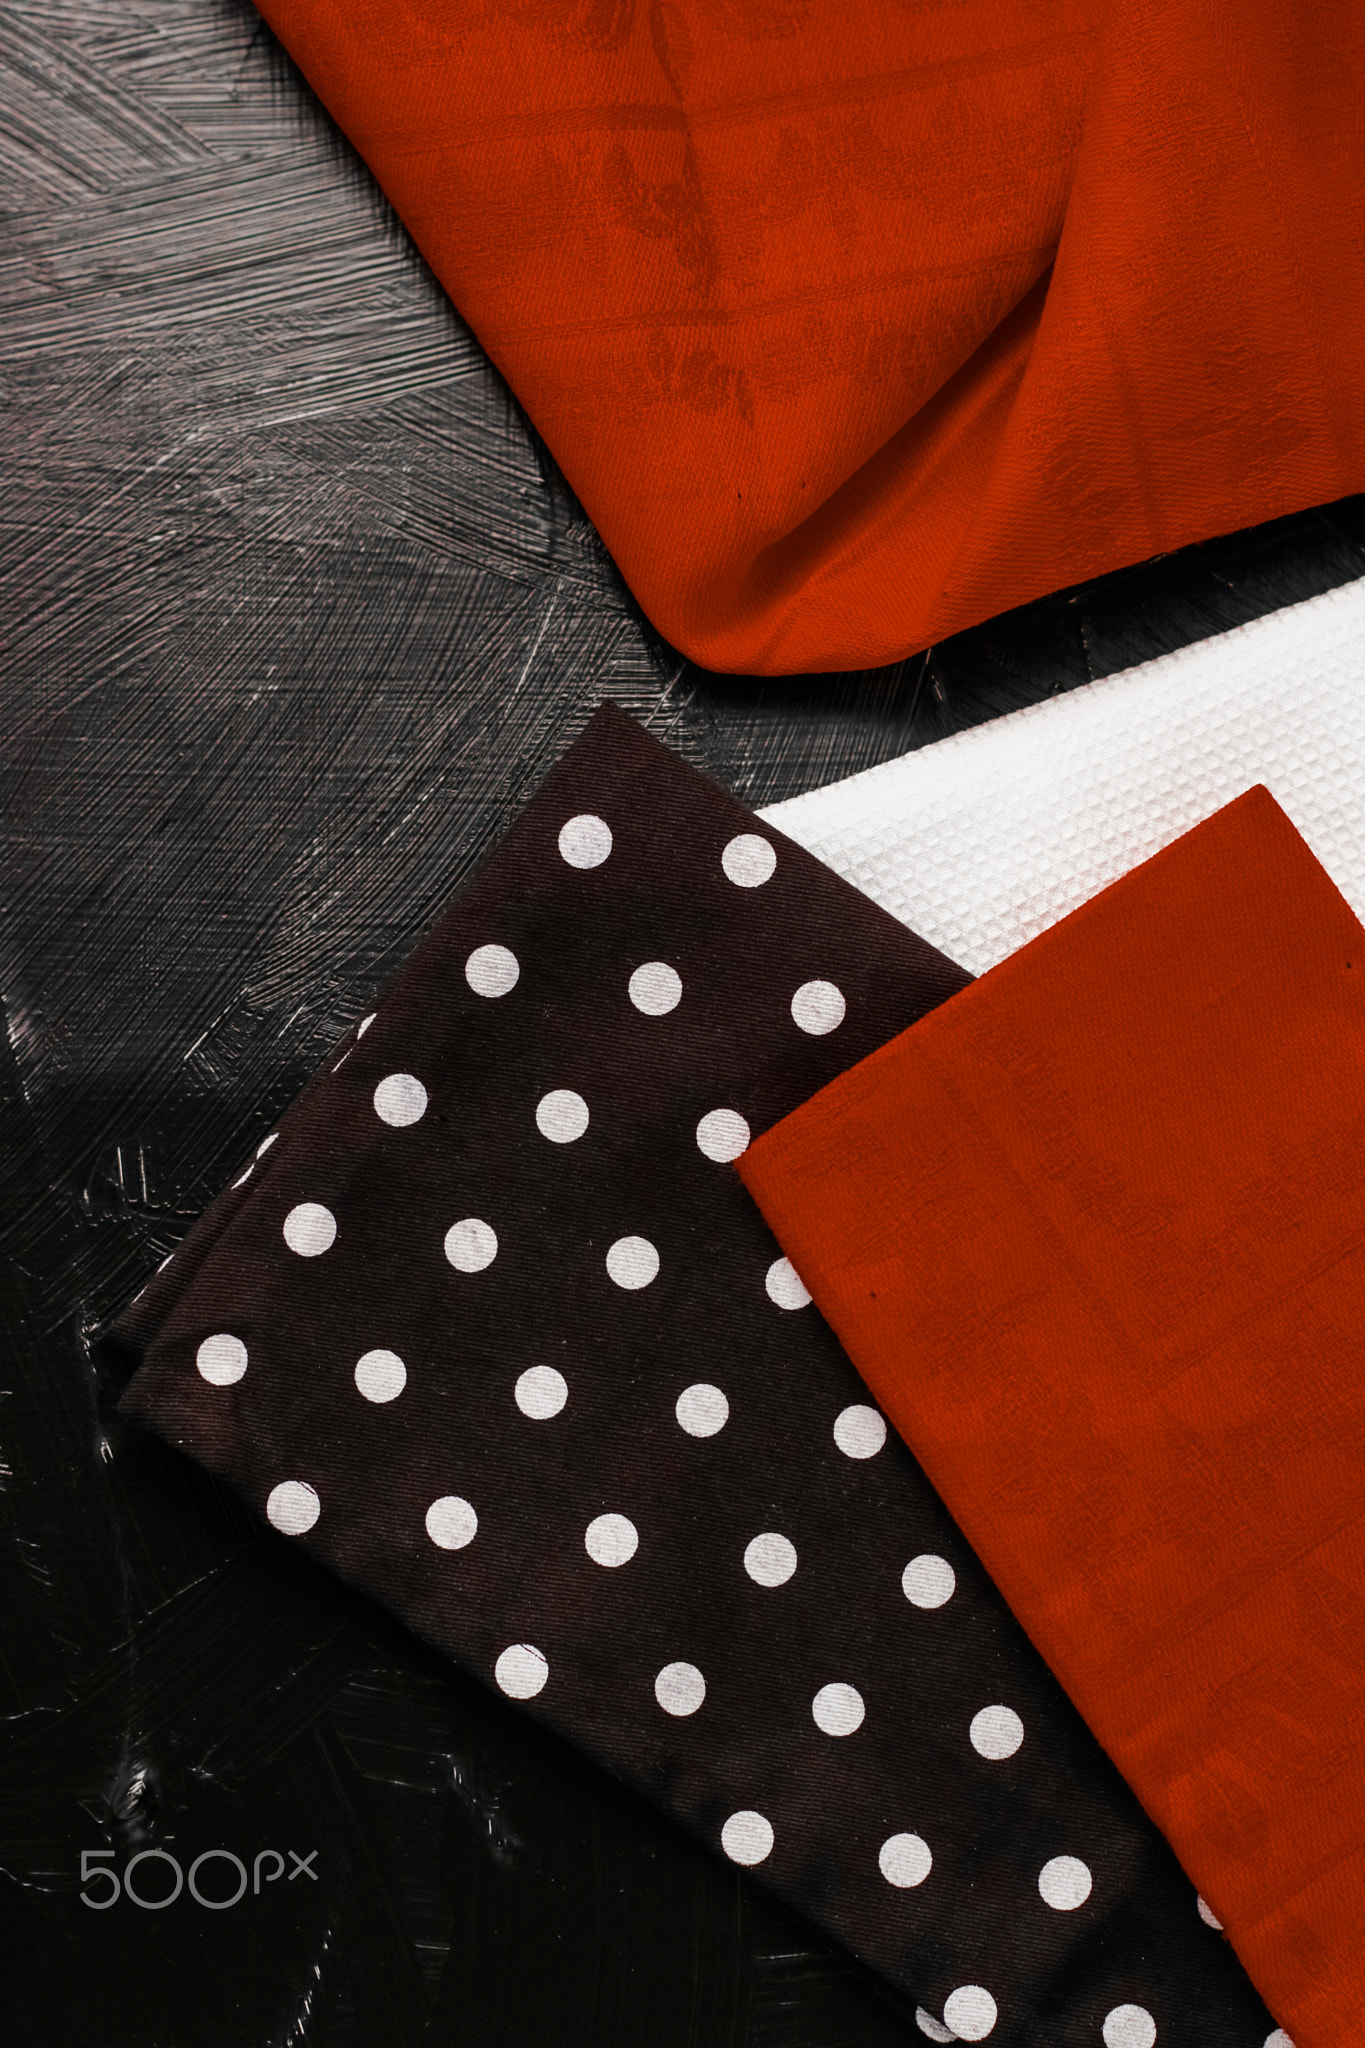 Kitchen textile on black rustic wooden background, napkin and towel